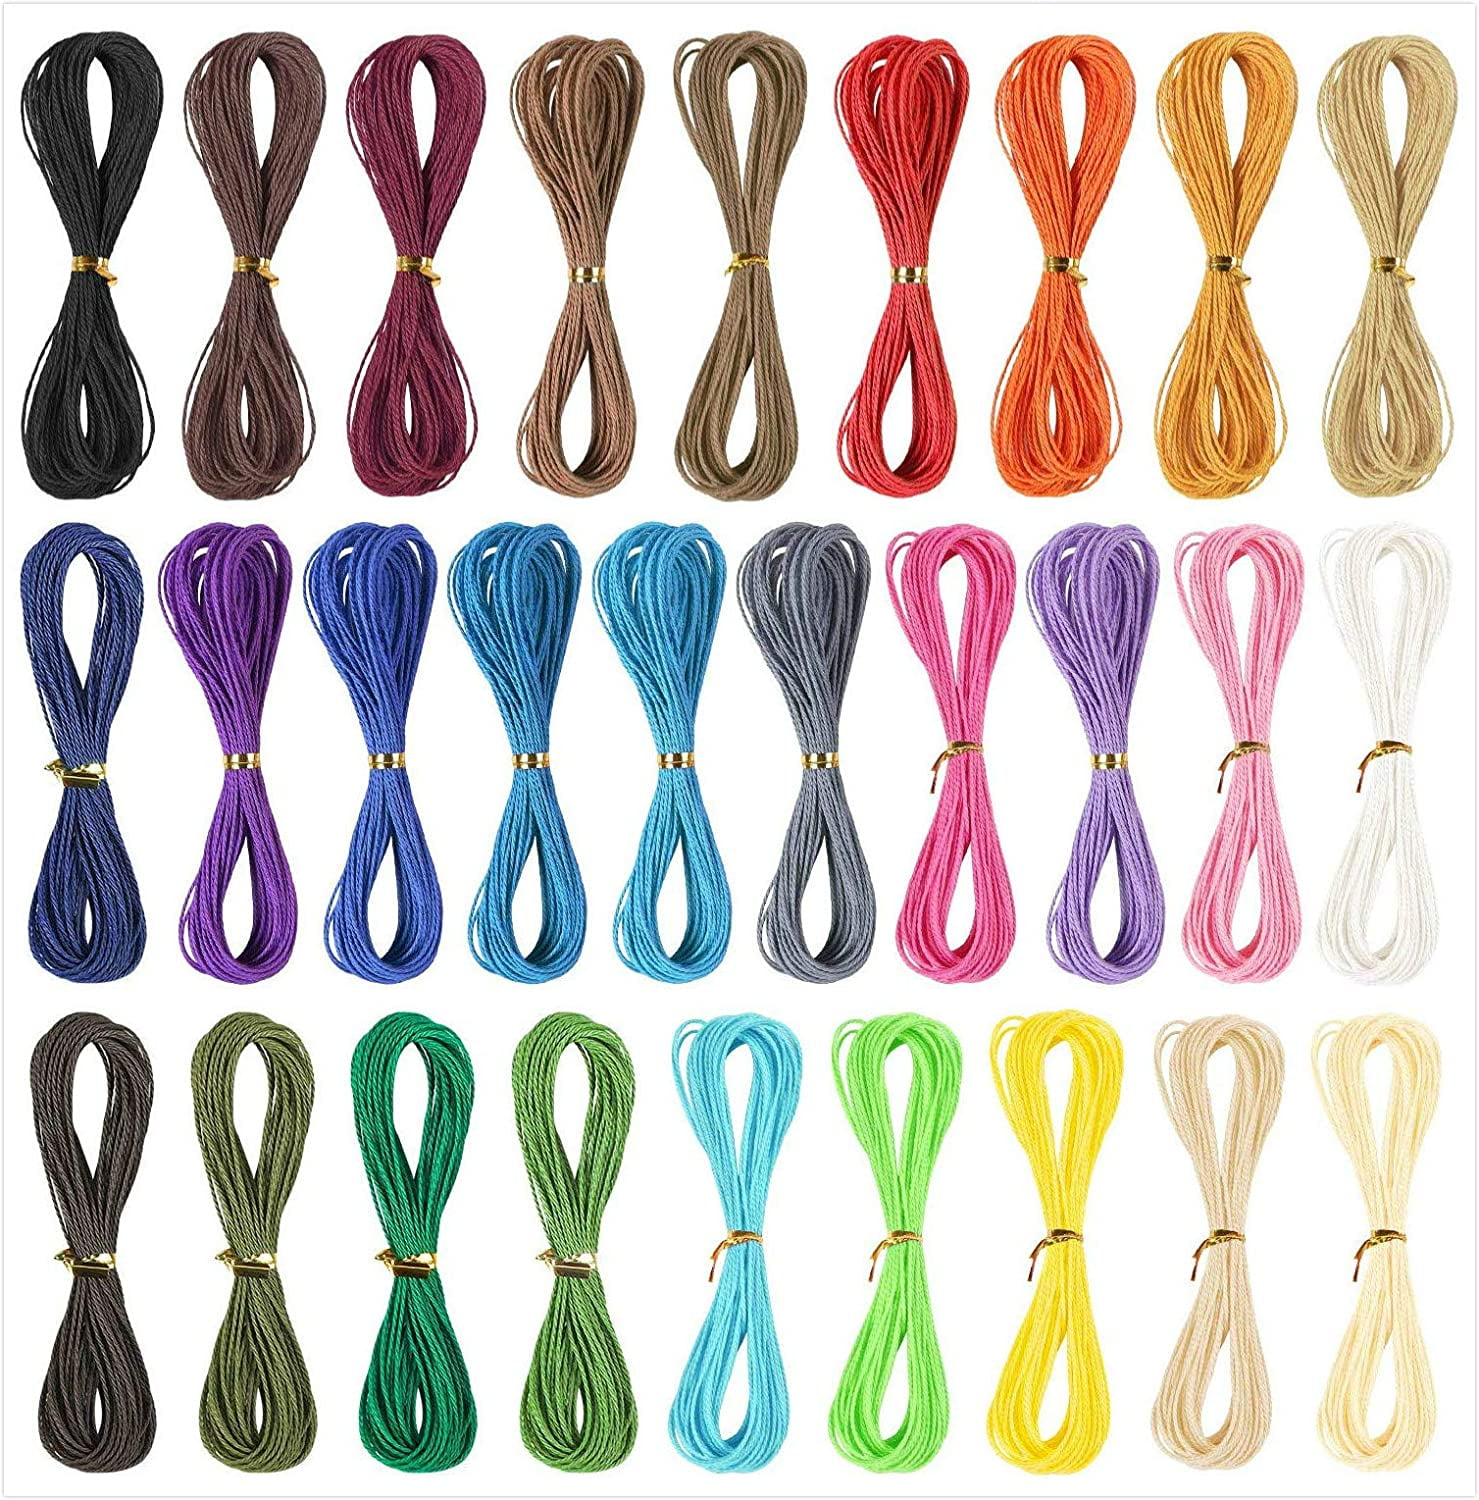 40 Colors Waxed Polyester Cord 437 Yard 1mm Waxed Bracelet Cord Wax String  Cord Waxed Thread for DIY Bracelets Necklace Jewelry Making Friendship